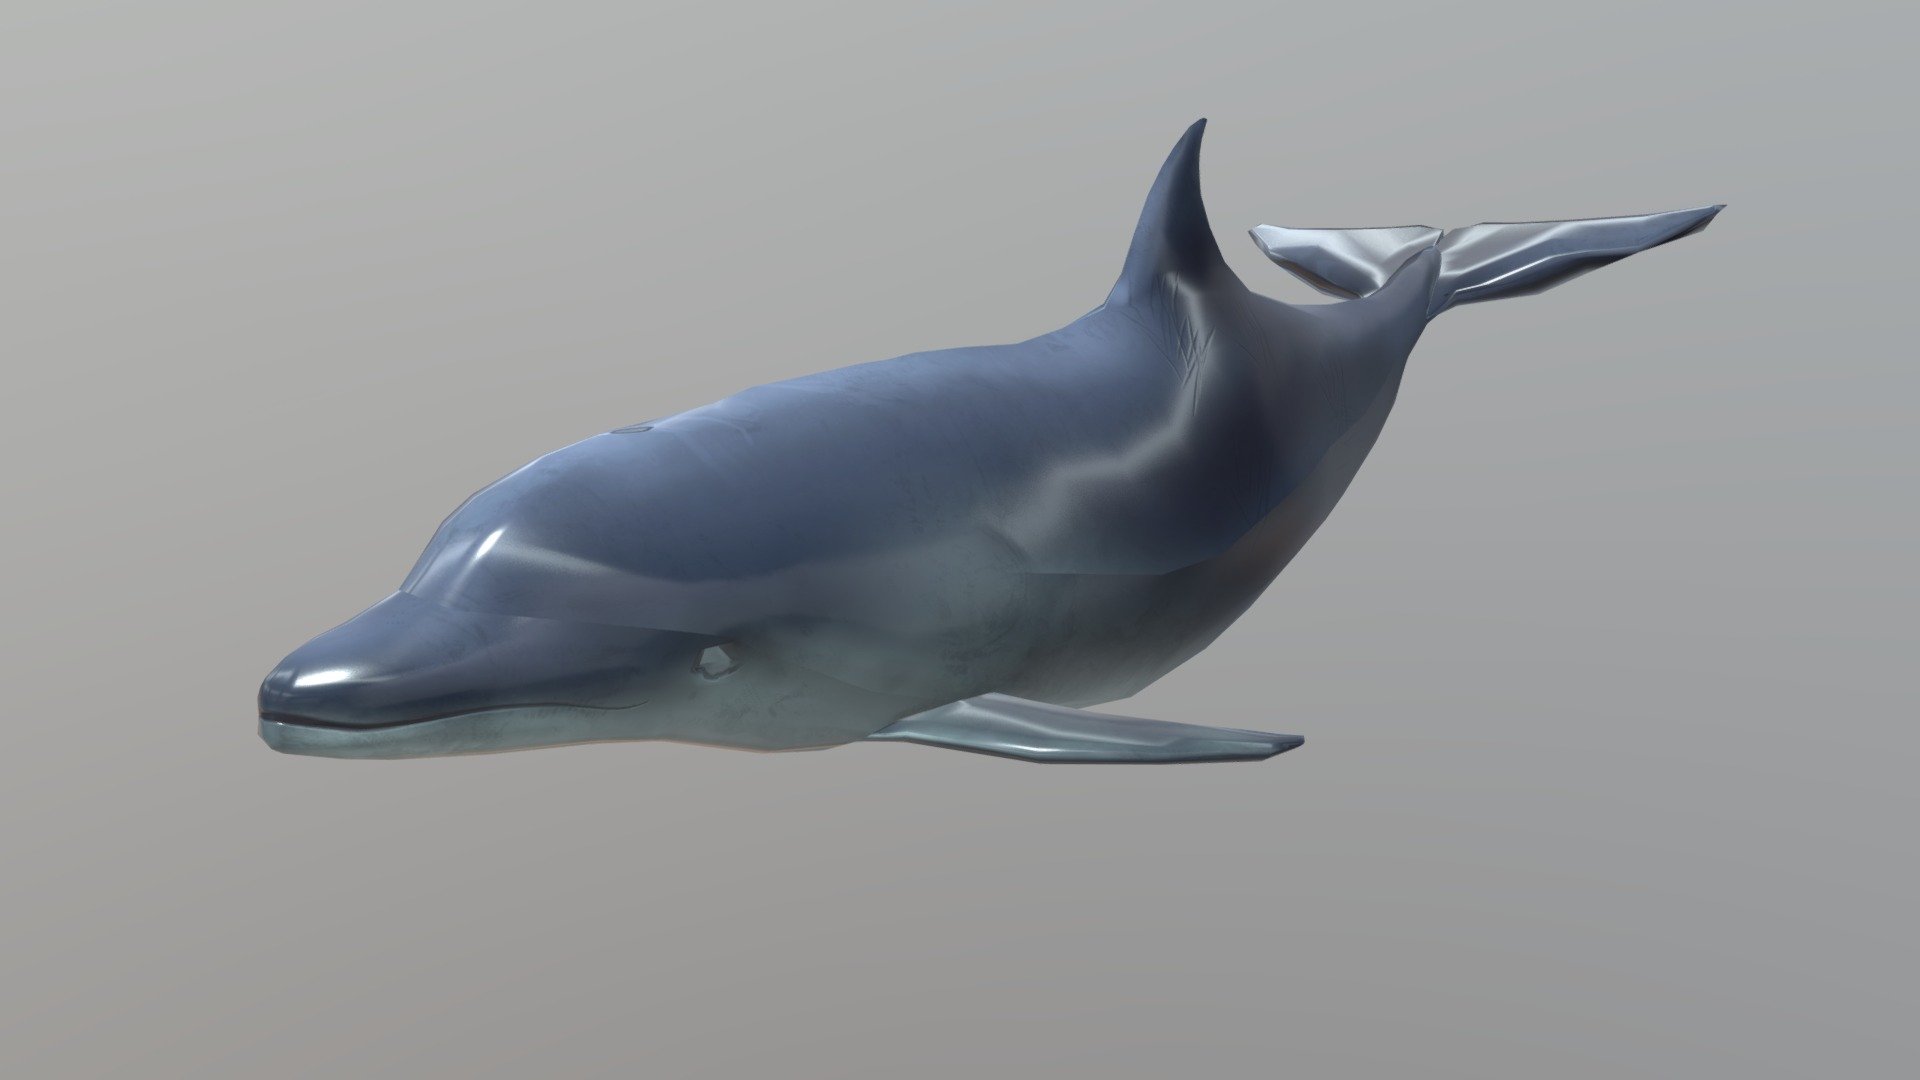 Game ready, VR ready dolphin model made in Oculus Medium, textured in Substance, and retopologized/animated in Maya. 1400 tris, animated to be swimming 3d model